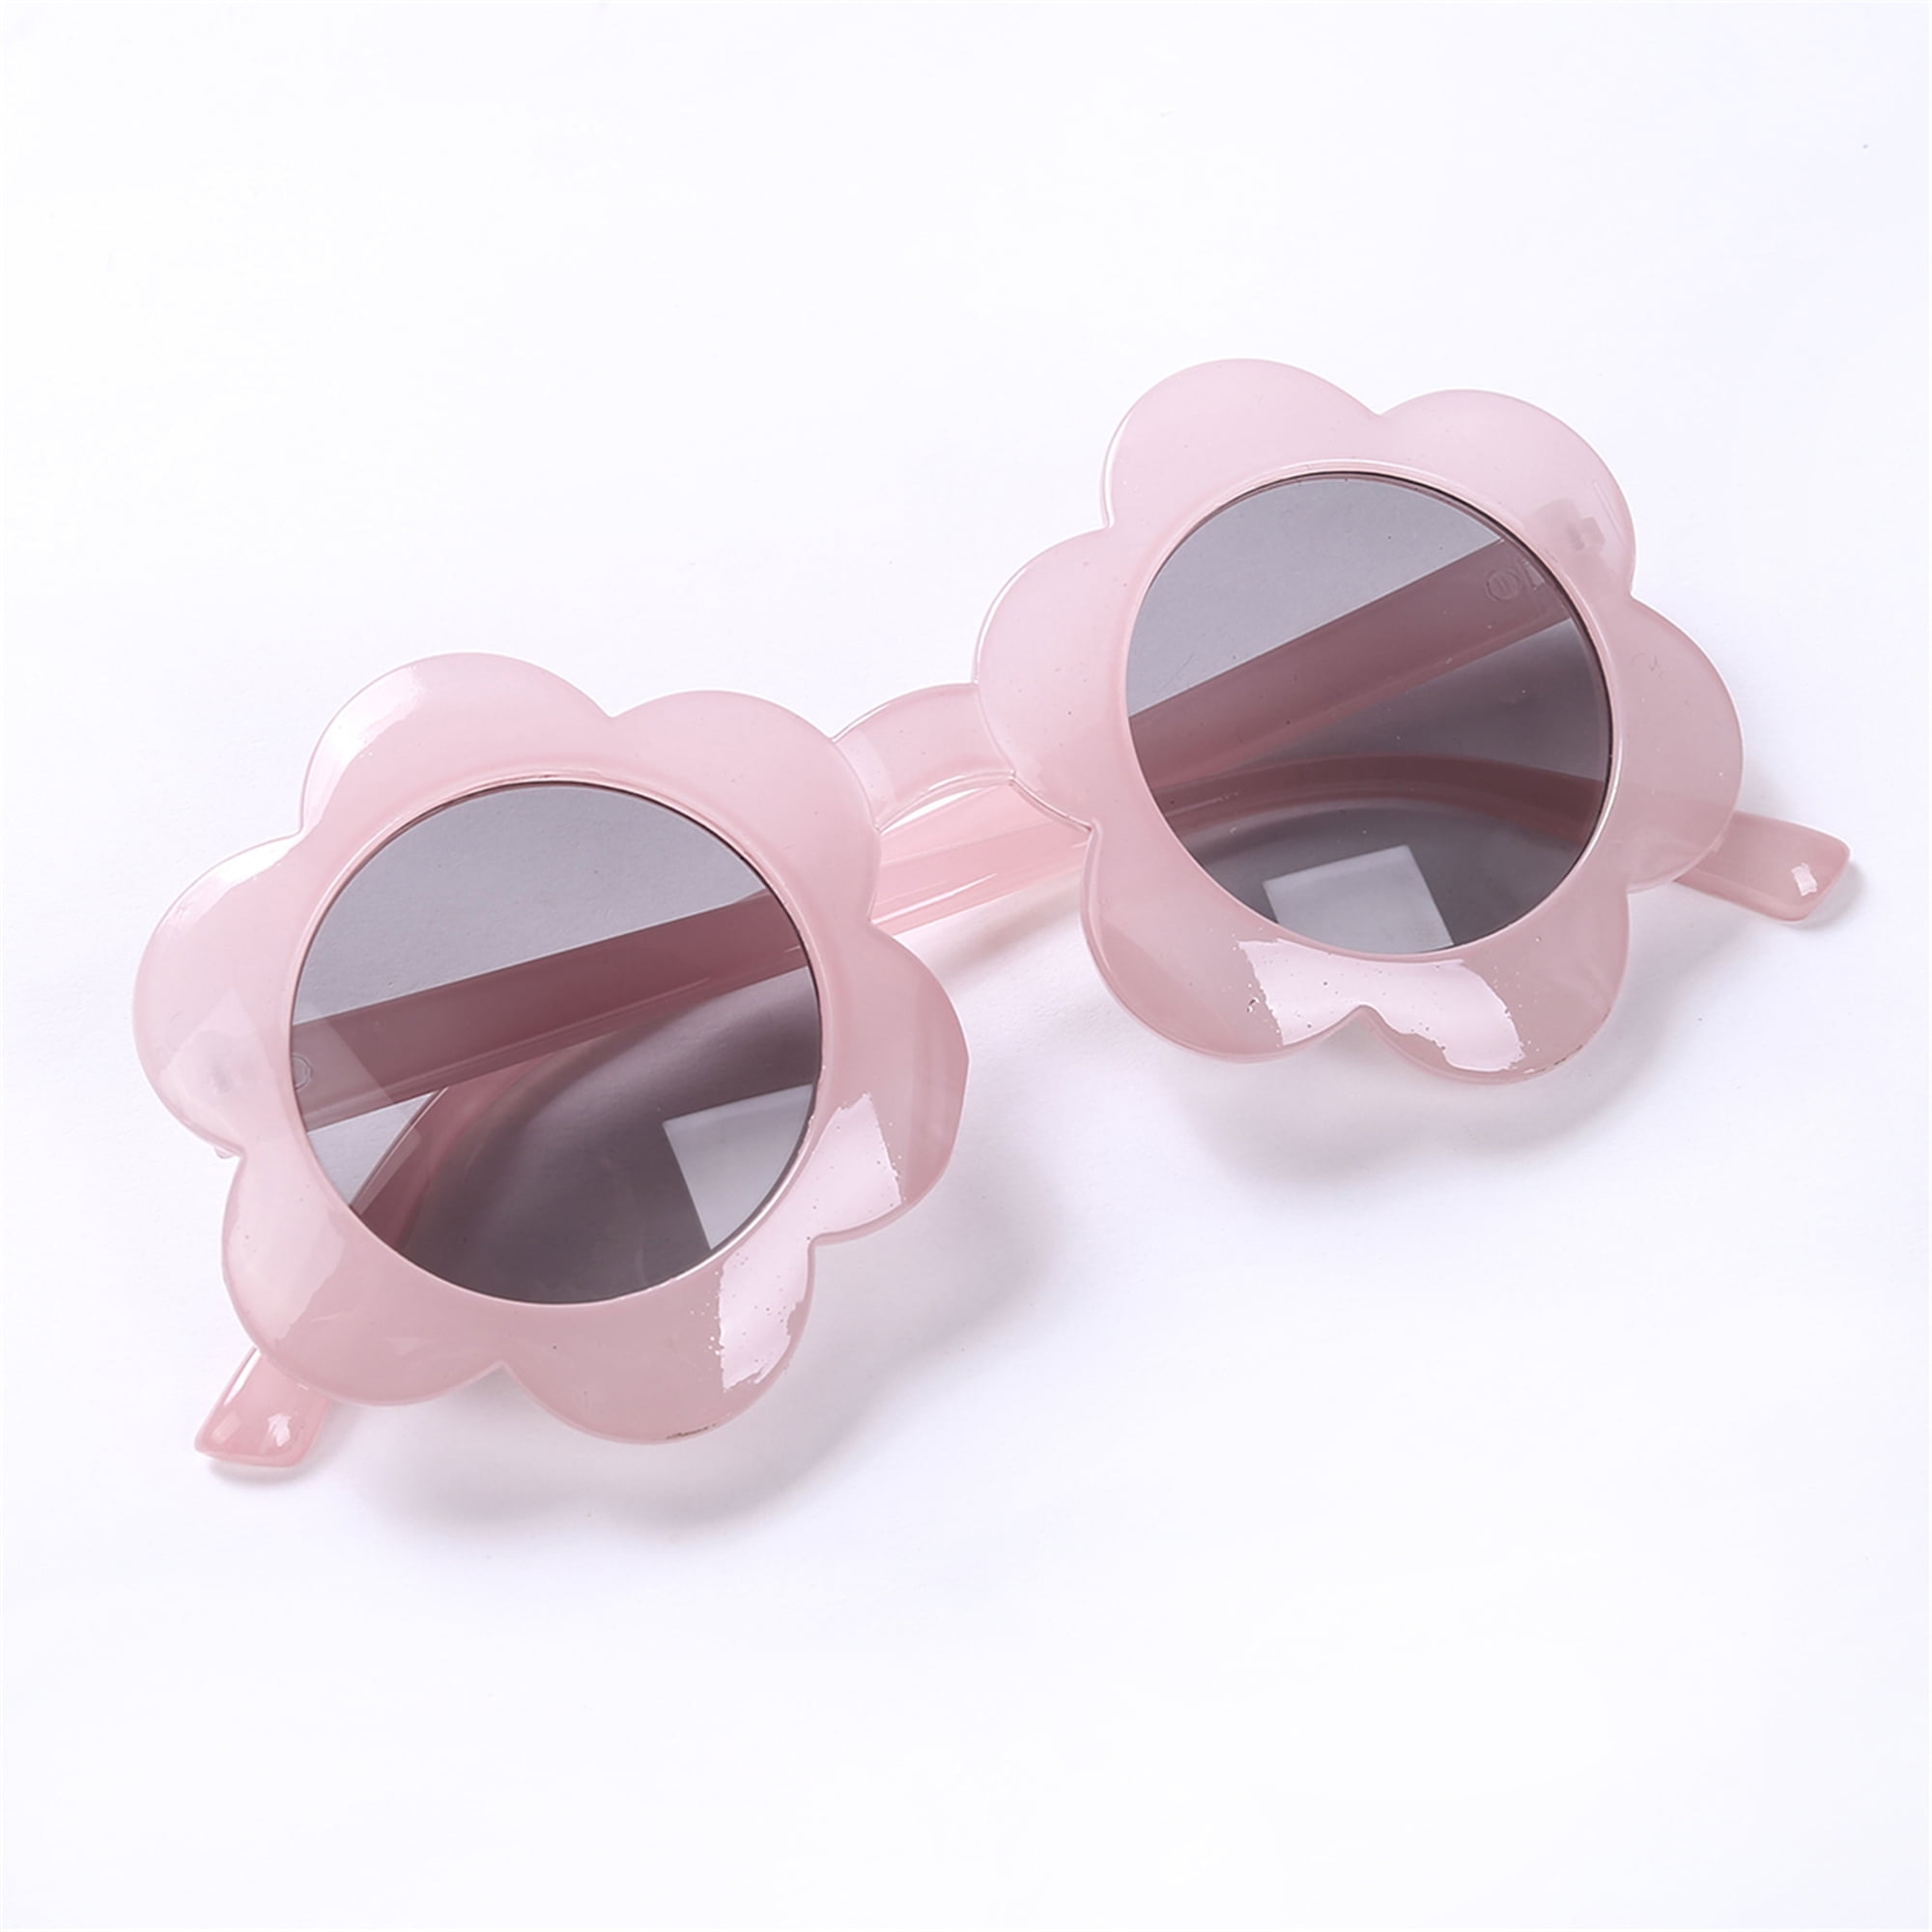 Toddler Kids Girl Boy Vintage Flower Round Anti-UV Sunglasses Colorful Cute Eyewear Suit for Party Photography Outdoor Beach 